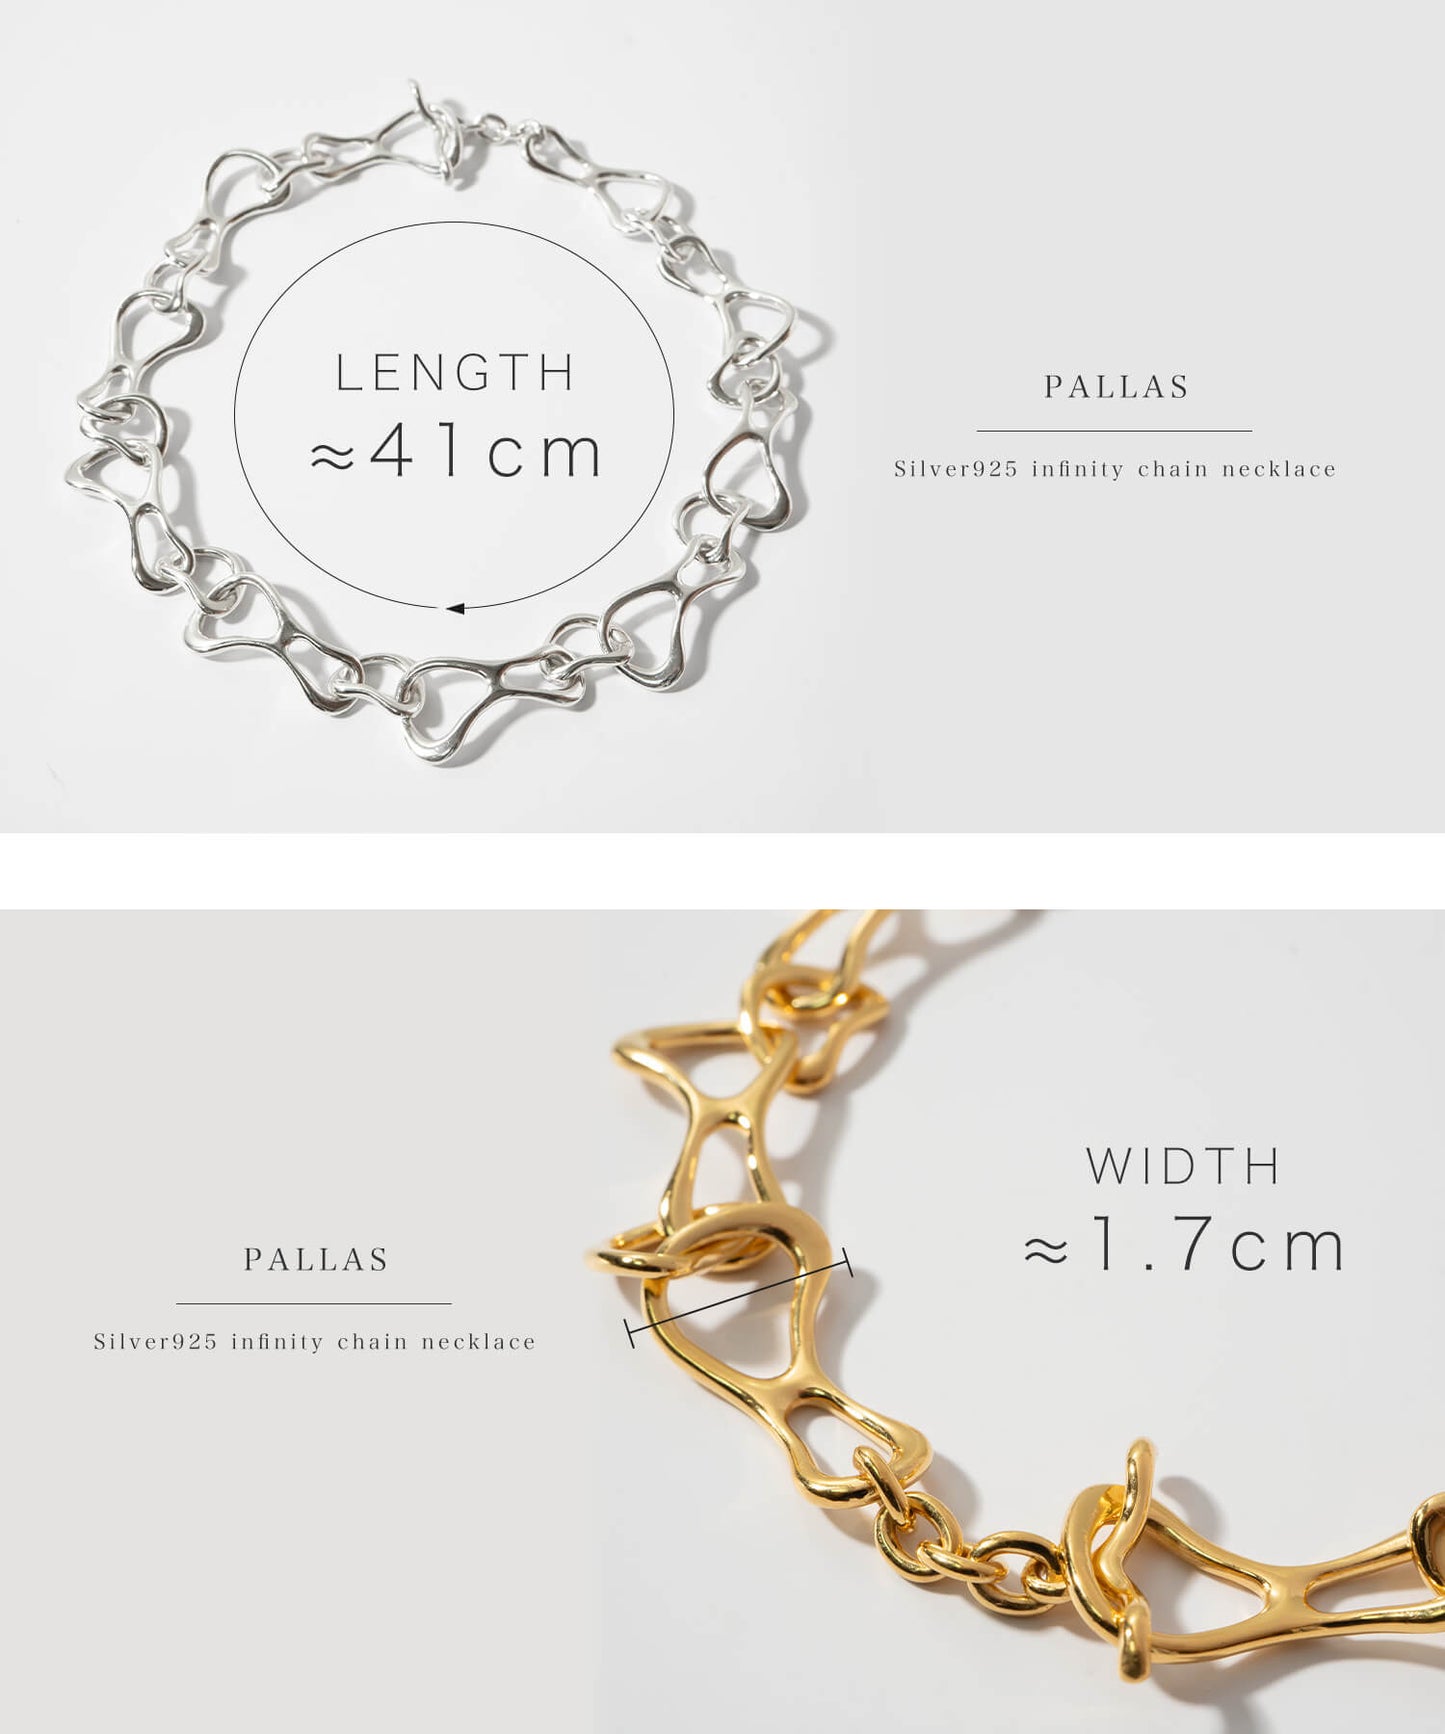 Silver925 infinity chain necklace | PALLAS NECKLACE